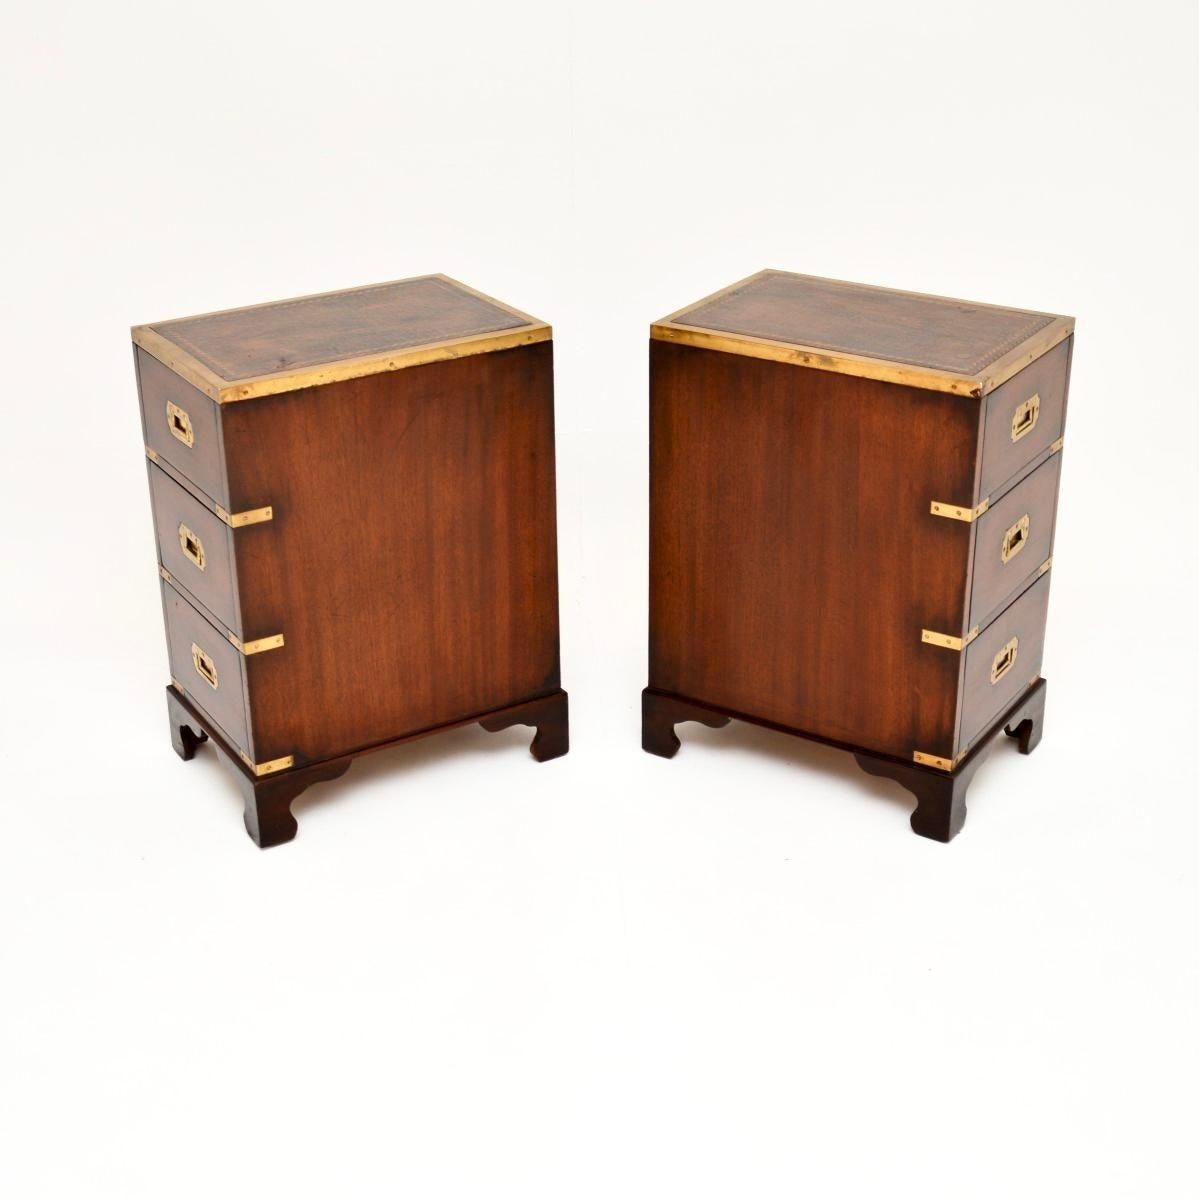 Pair of Antique Military Campaign Style Bedside Chests In Good Condition For Sale In London, GB